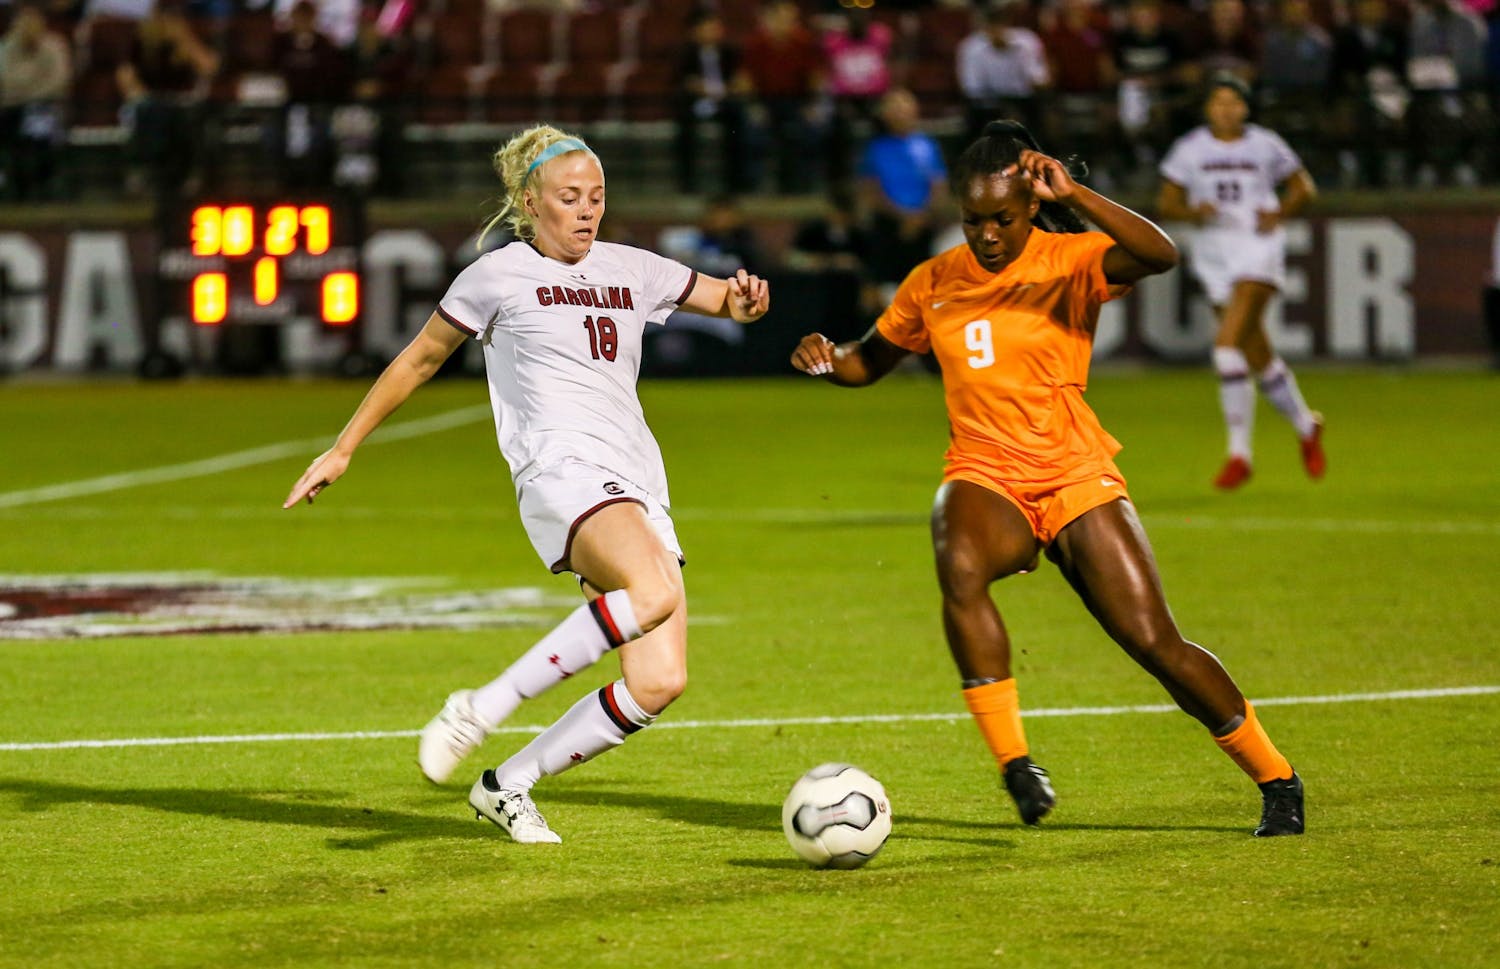 Defender Grace Fisk dribbles around a defender in a game during the 2019 鶹С򽴫ý against Tennessee. The Gamecocks lost 1-0 to the Volunteers on Friday.